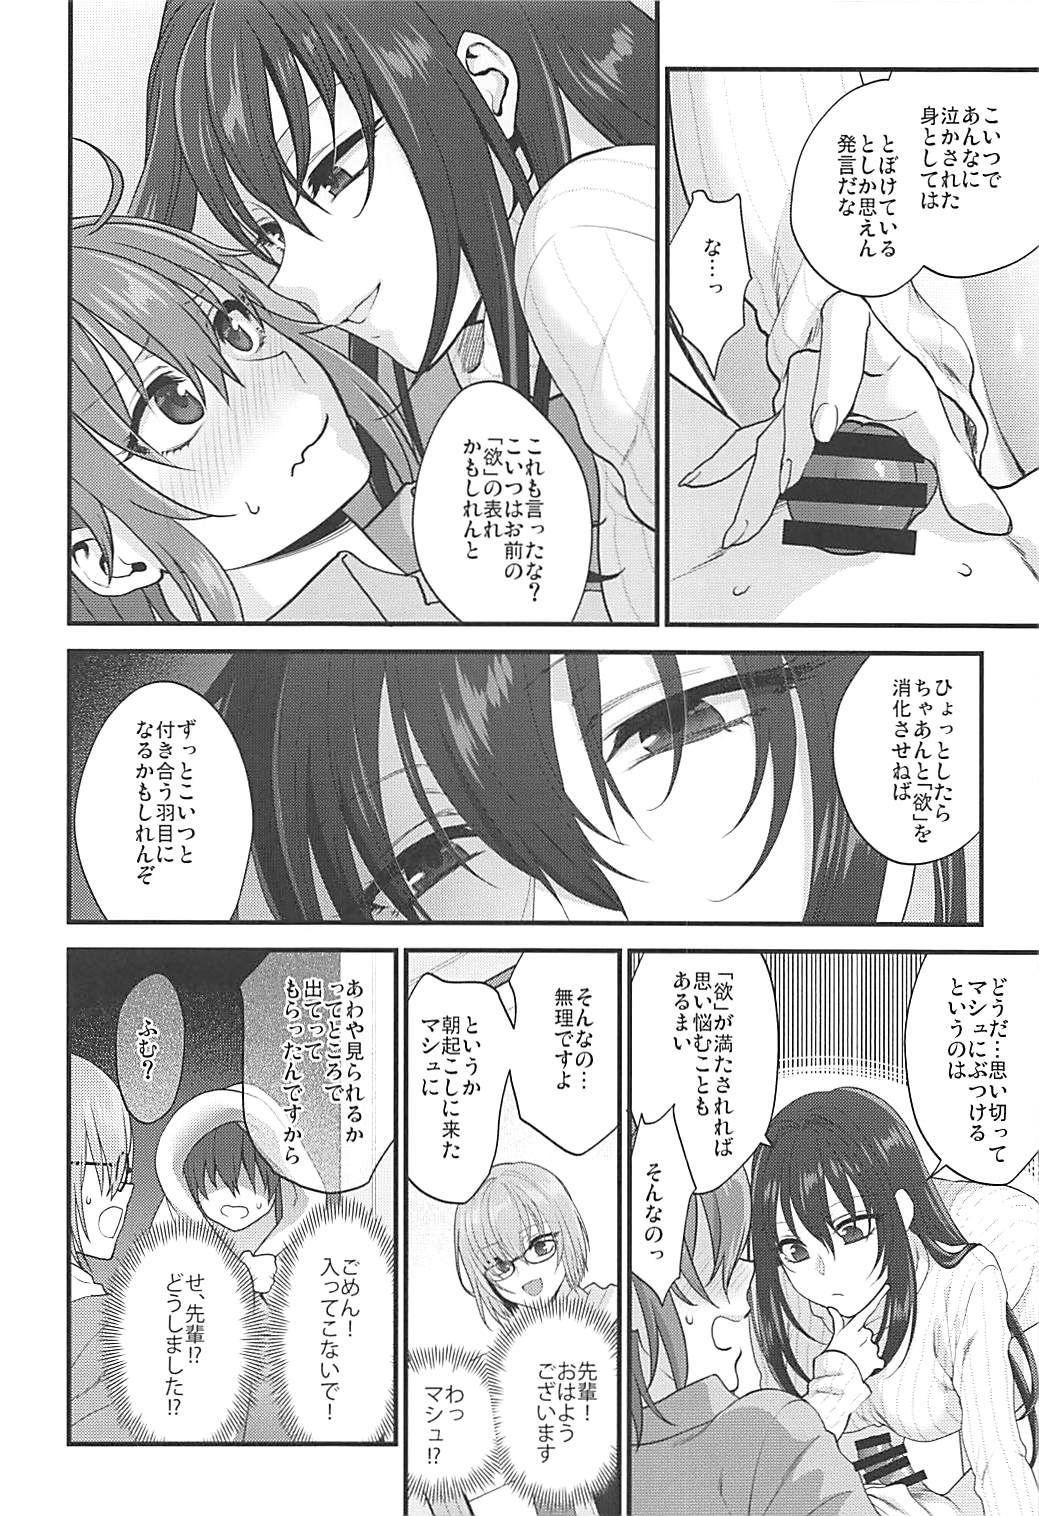 Culo In my room. - Fate grand order Flaquita - Page 7